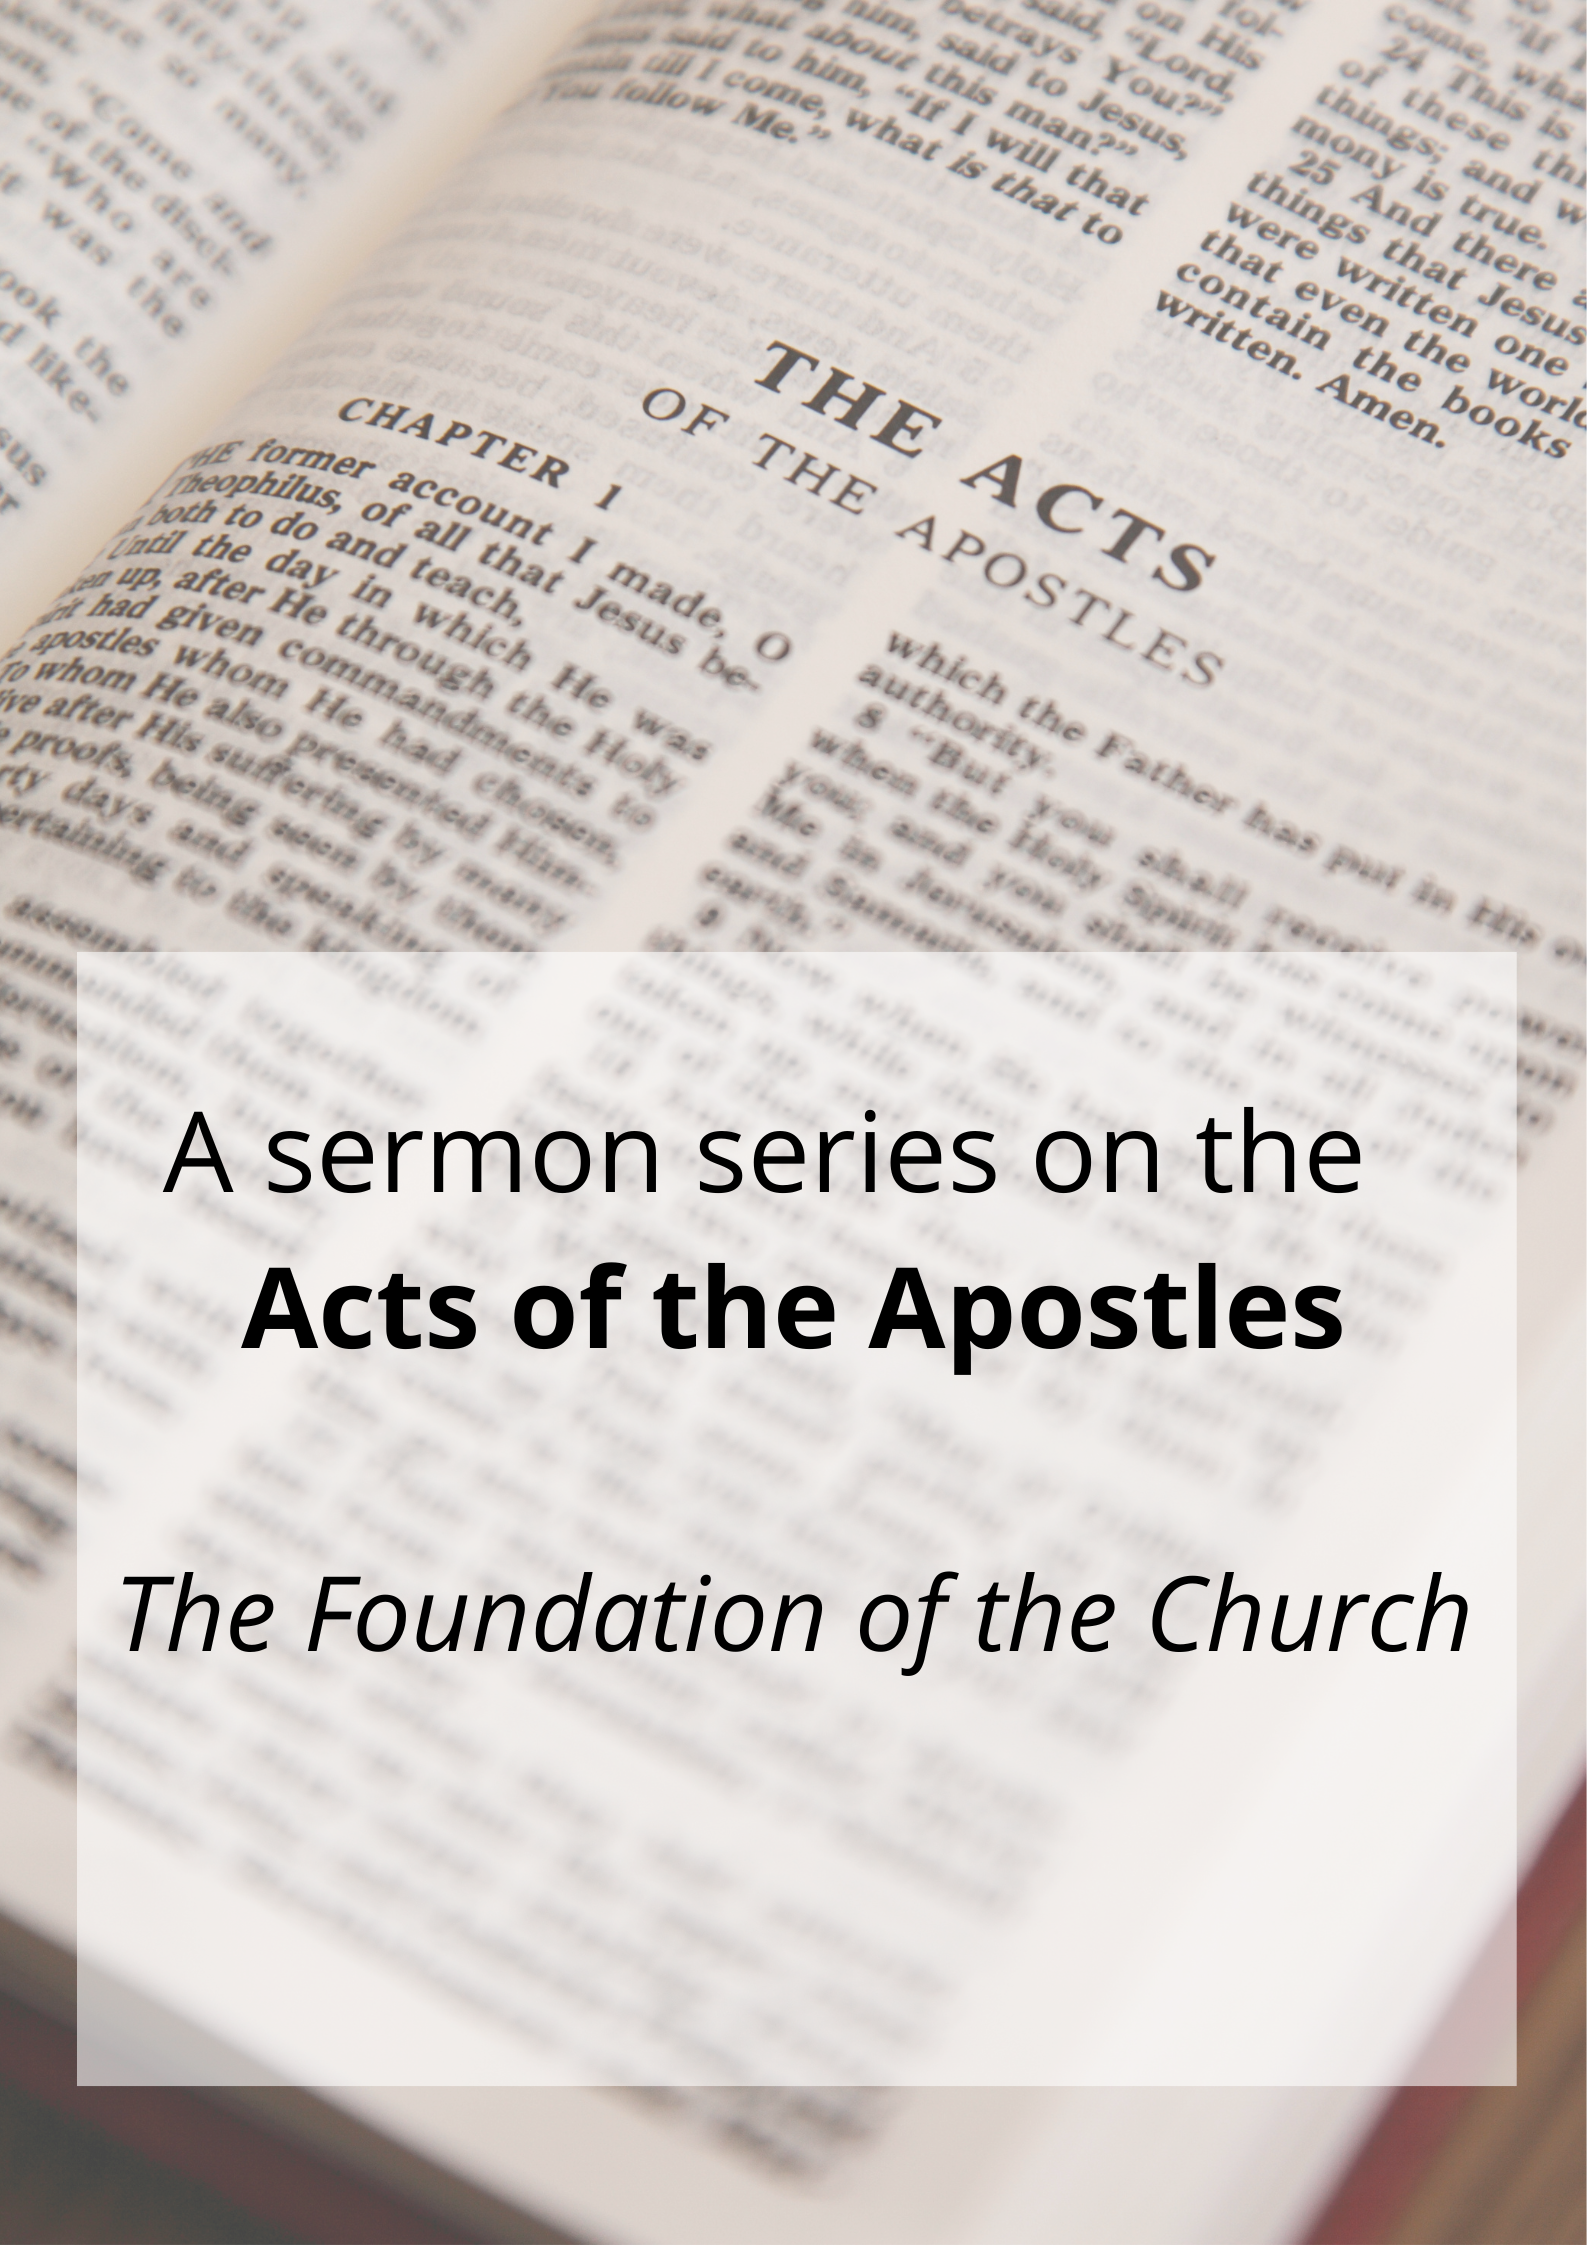 A sermon series on the Book of